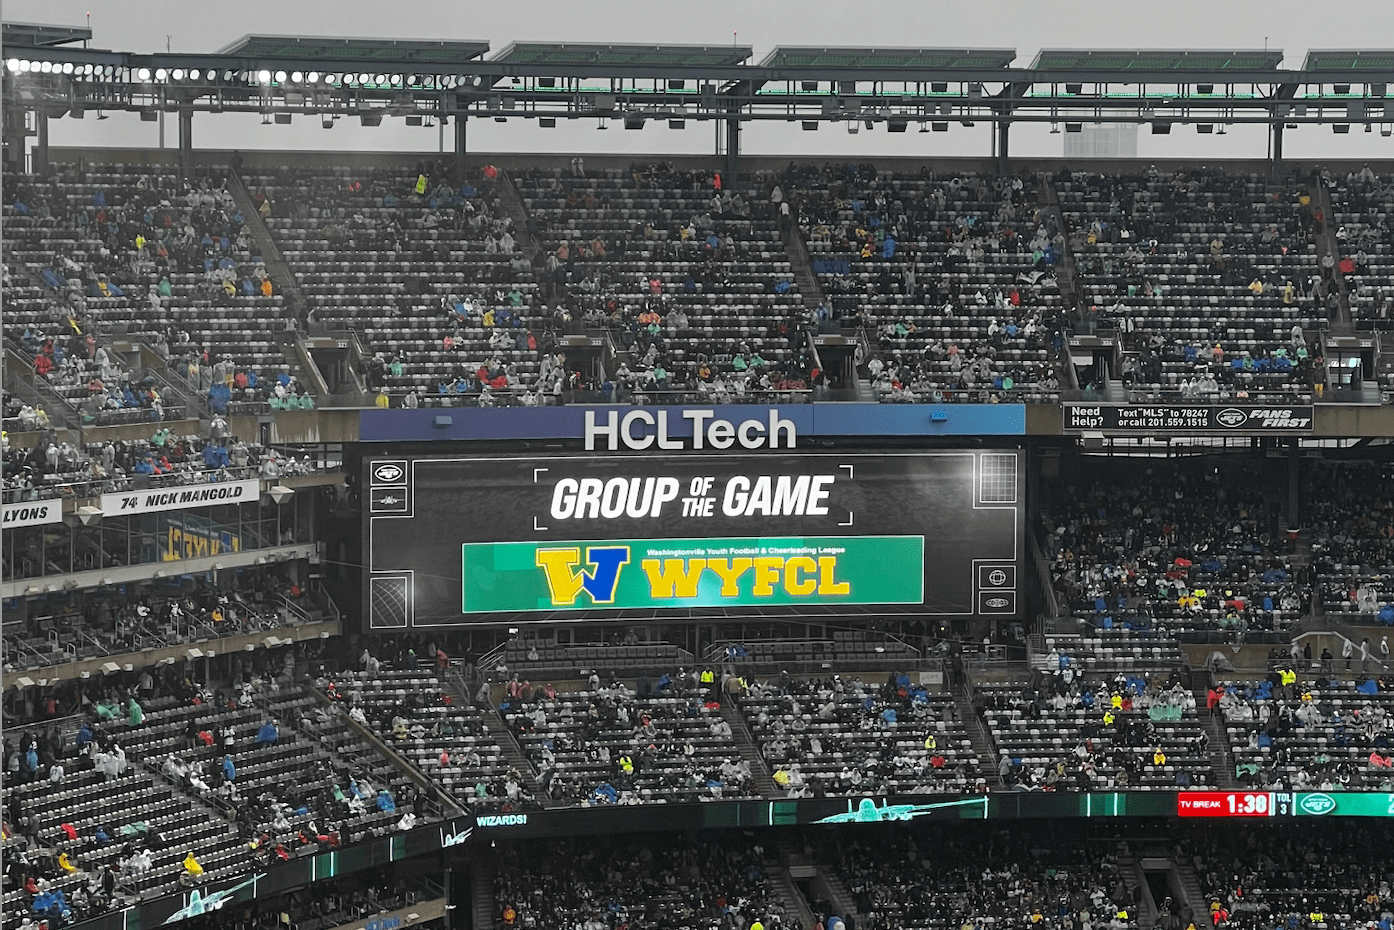 The WYFCL was acknowledged at a New York Jets home game.